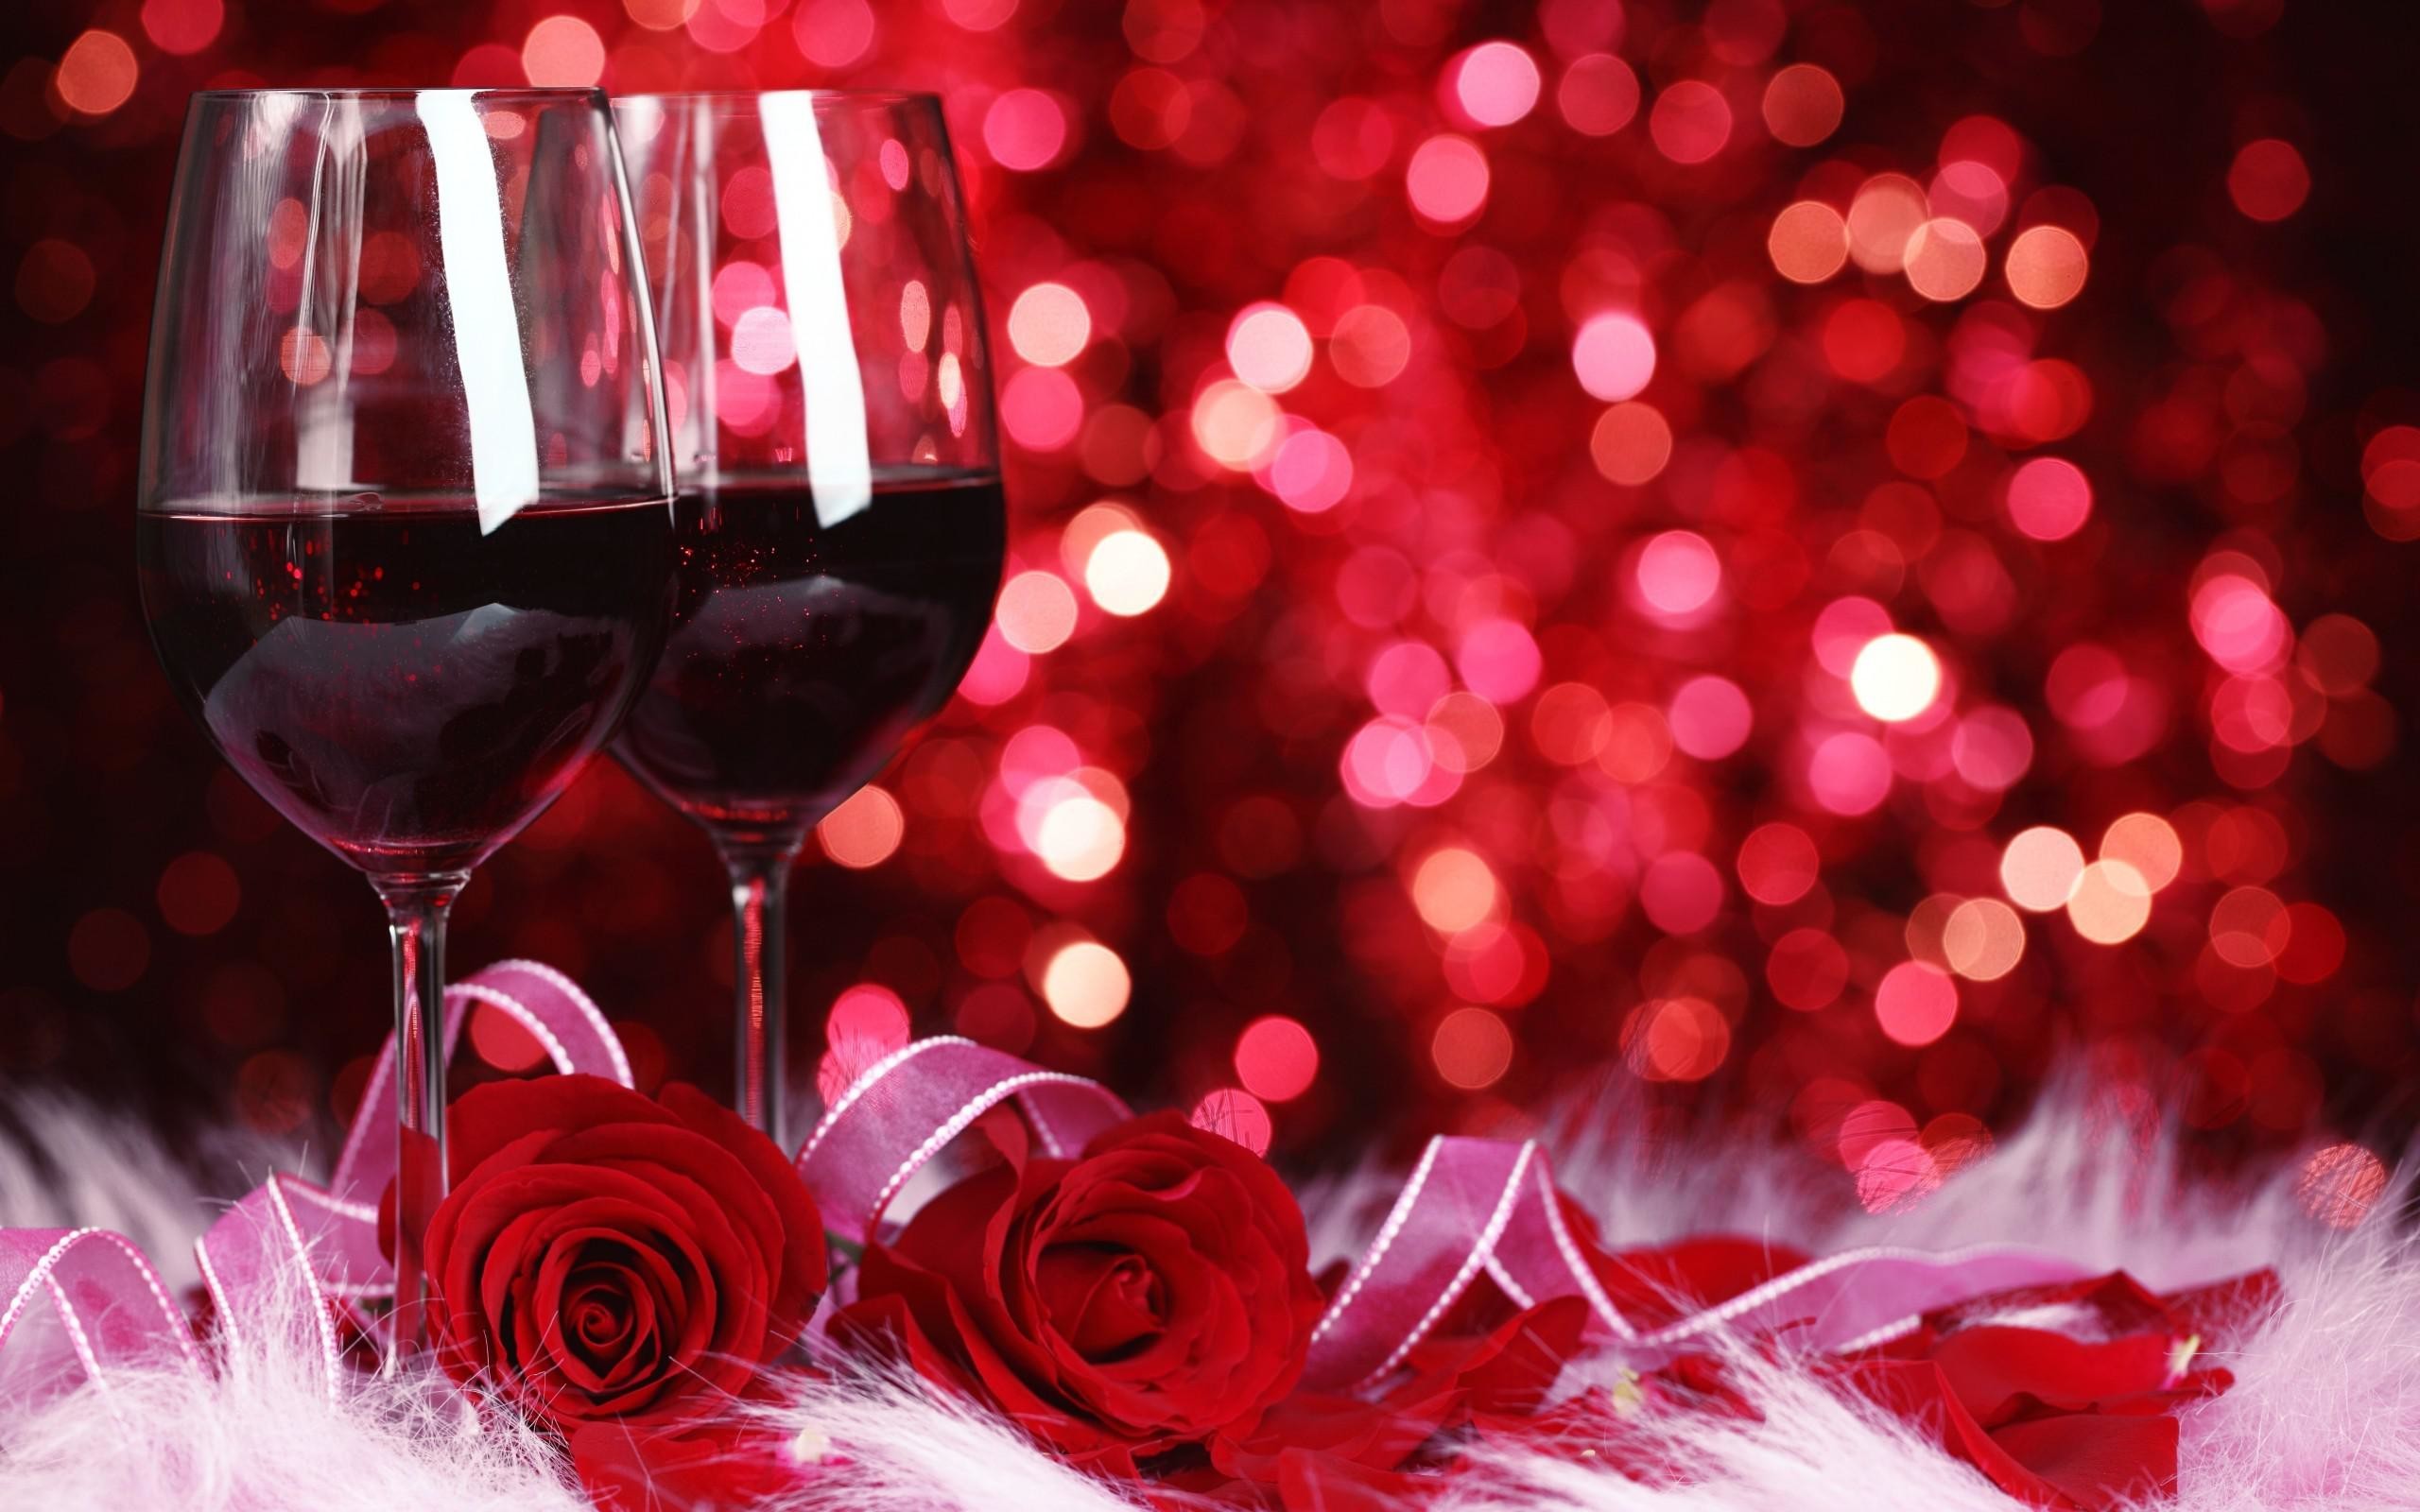 2560x1600 2016-02-04-1454603808-9900317-wine_and_roses.jpg